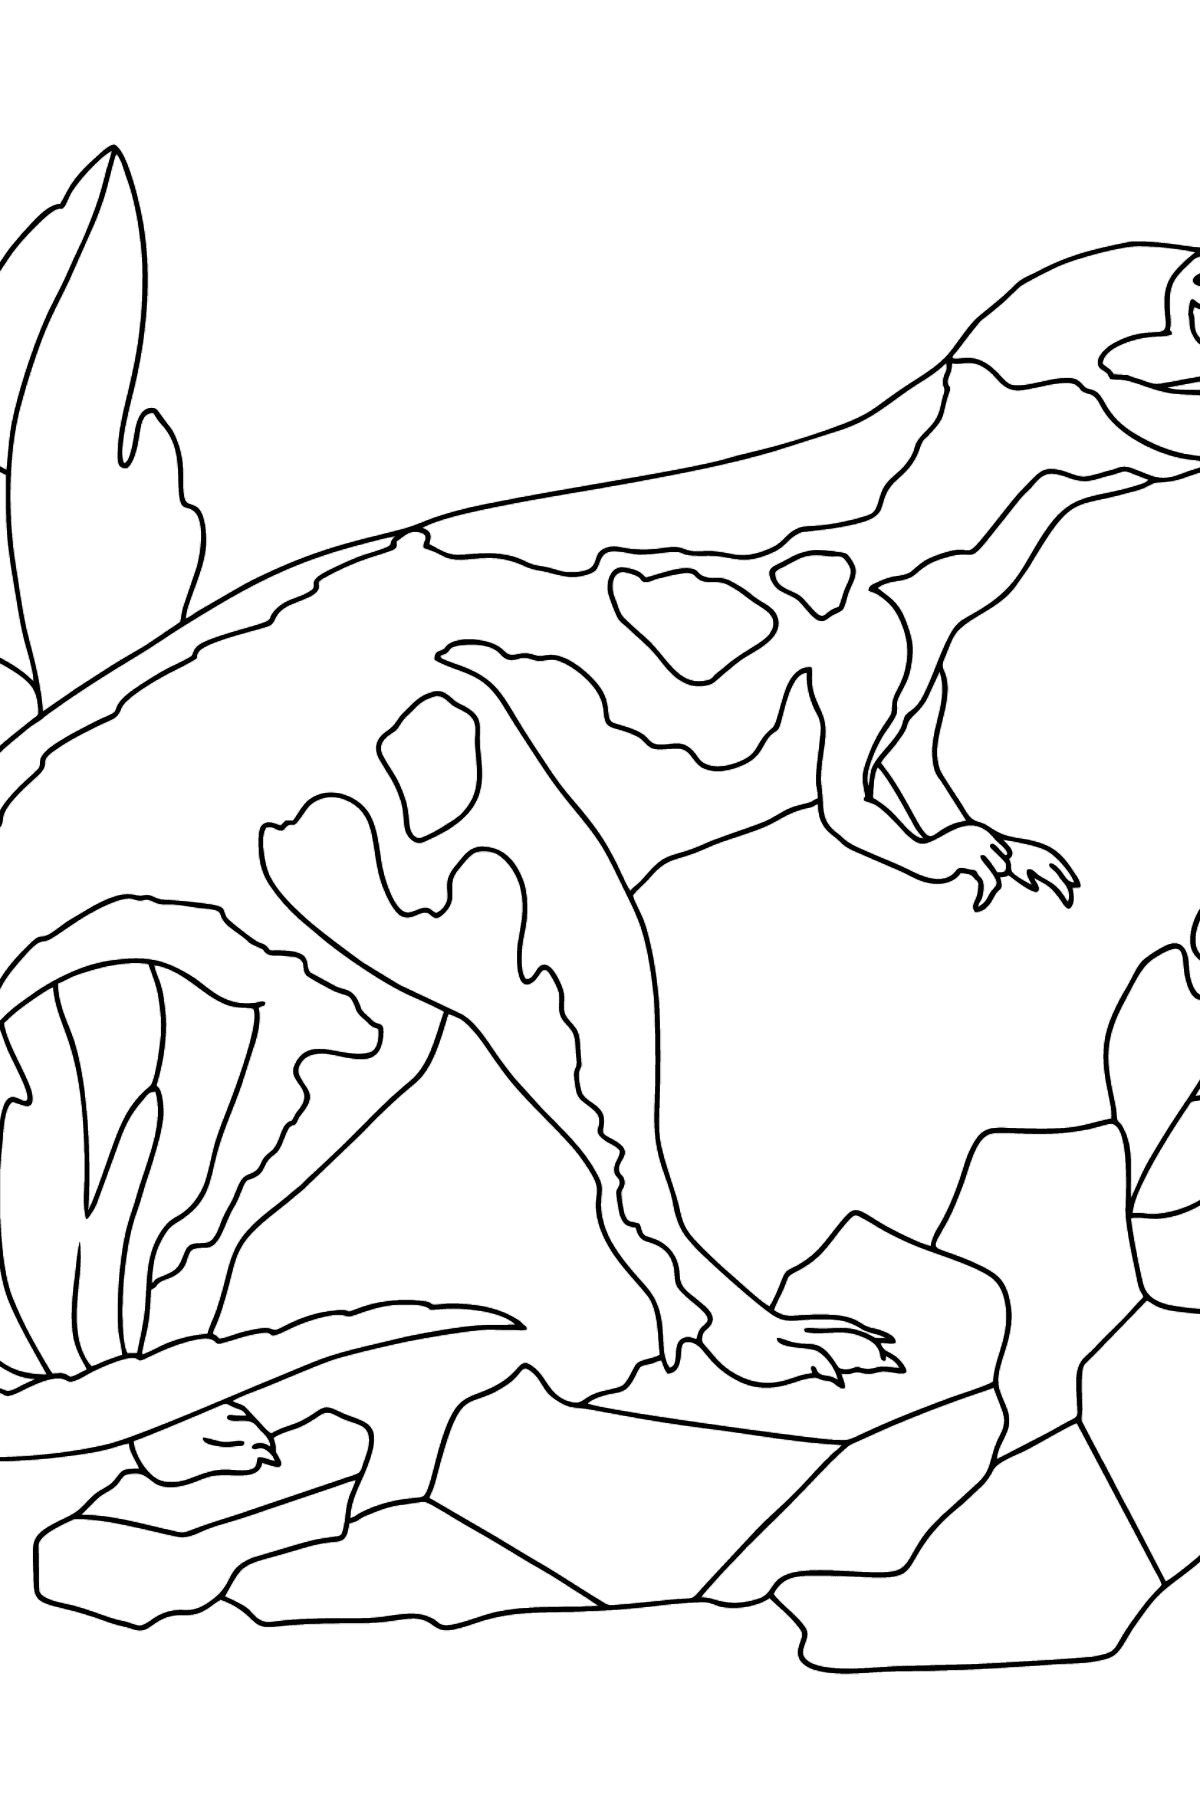 Coloring Page - Tyrannosaurus - The Most Popular Dinosaur on the Planet - Coloring Pages for Kids